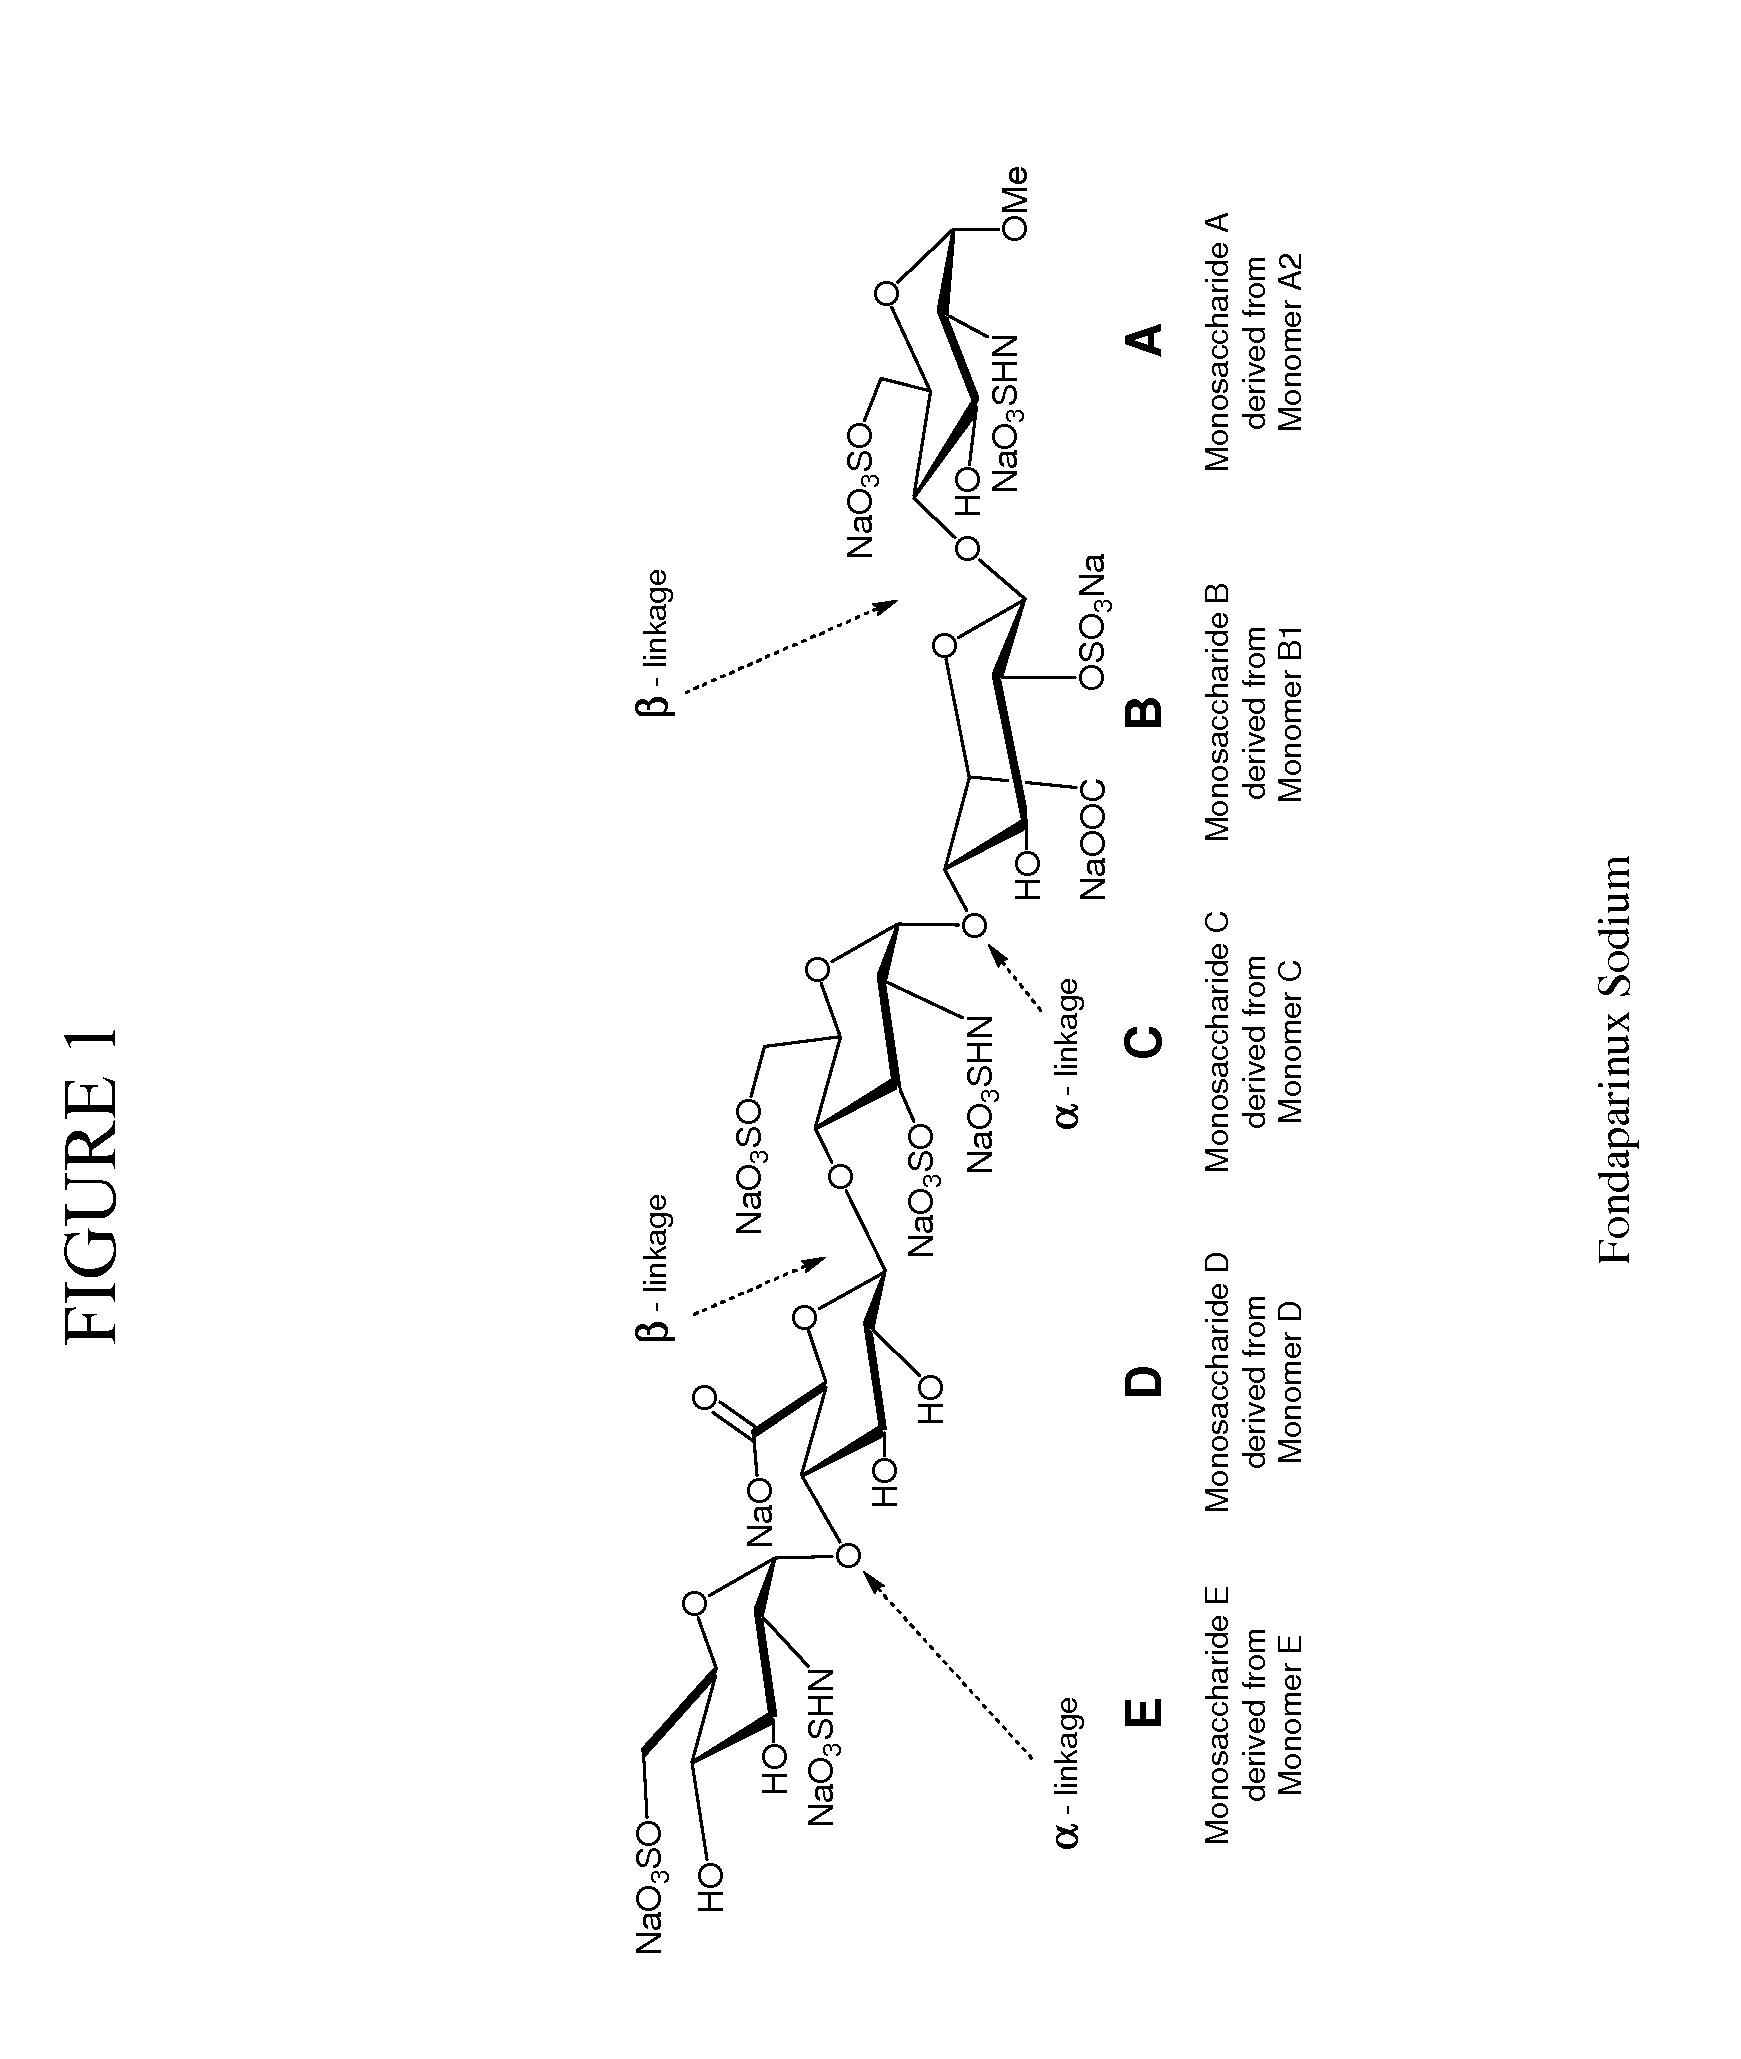 Process for preparing fondaparinux sodium and intermediates useful in the synthesis thereof